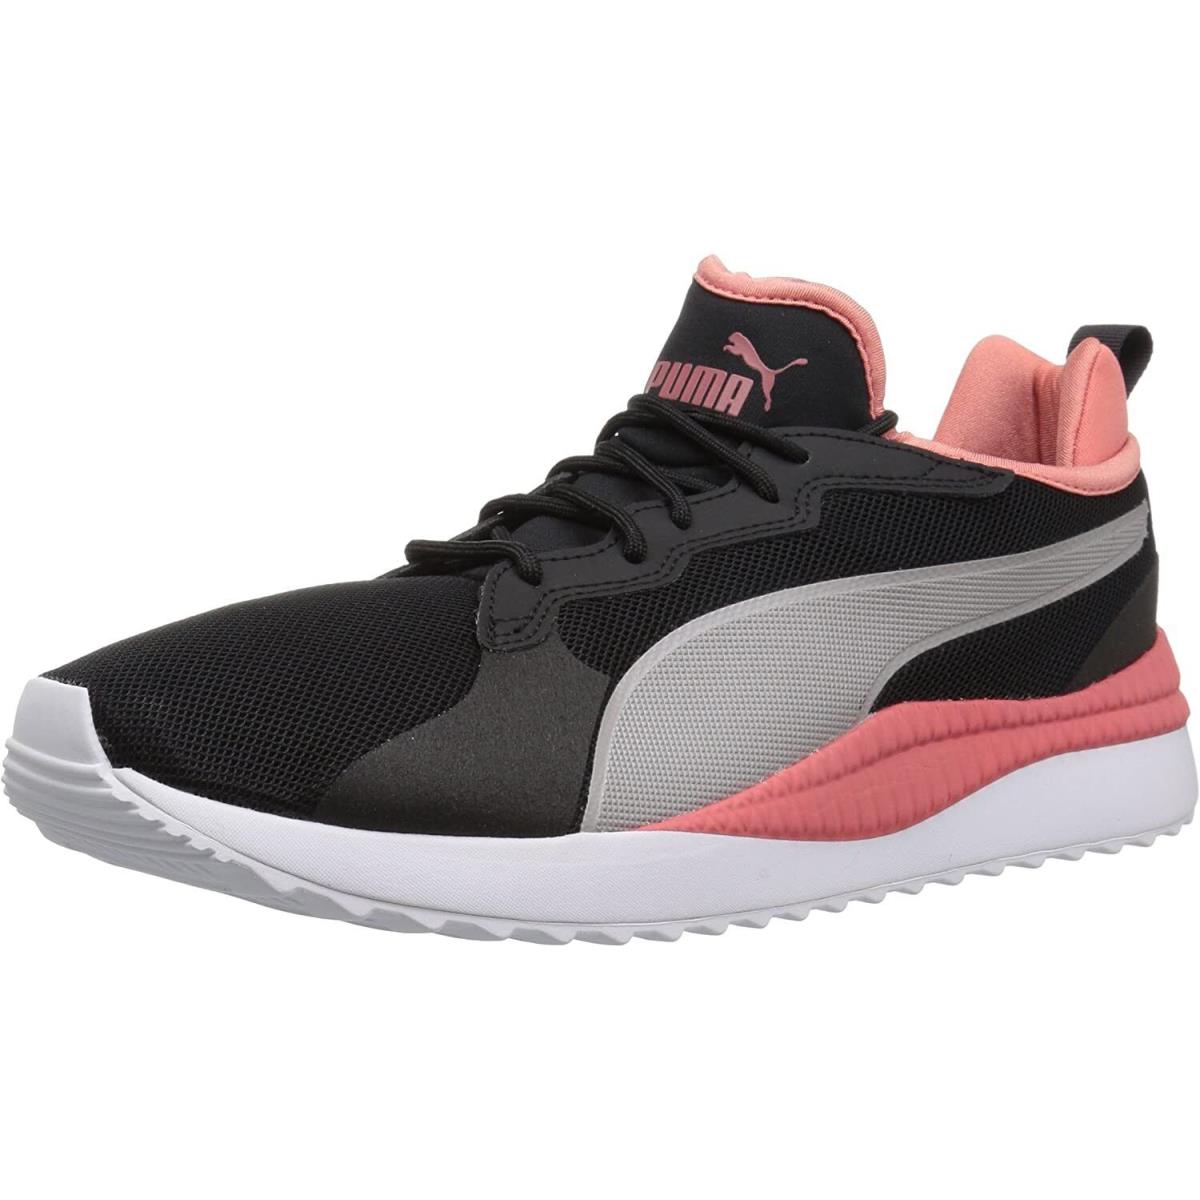 Puma Womens Pacer Next Athletic Sneakers Black Coral Running Shoes